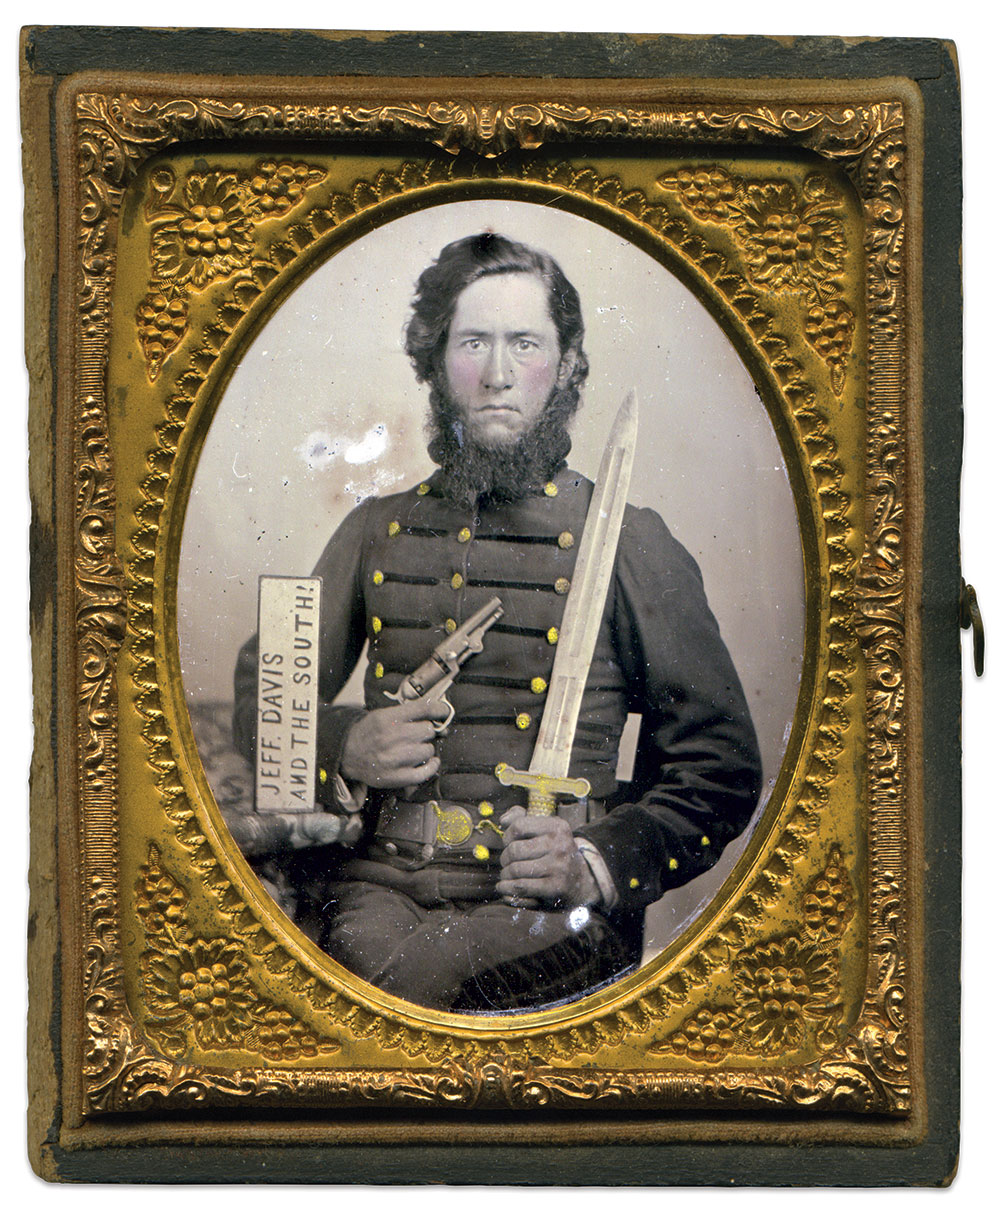 JEFF. DAVIS AND THE SOUTH! Joseph C. White, 12th Mississippi Infantry. Sixth plate ambrotype. Rick Brown Collection of American Photography.